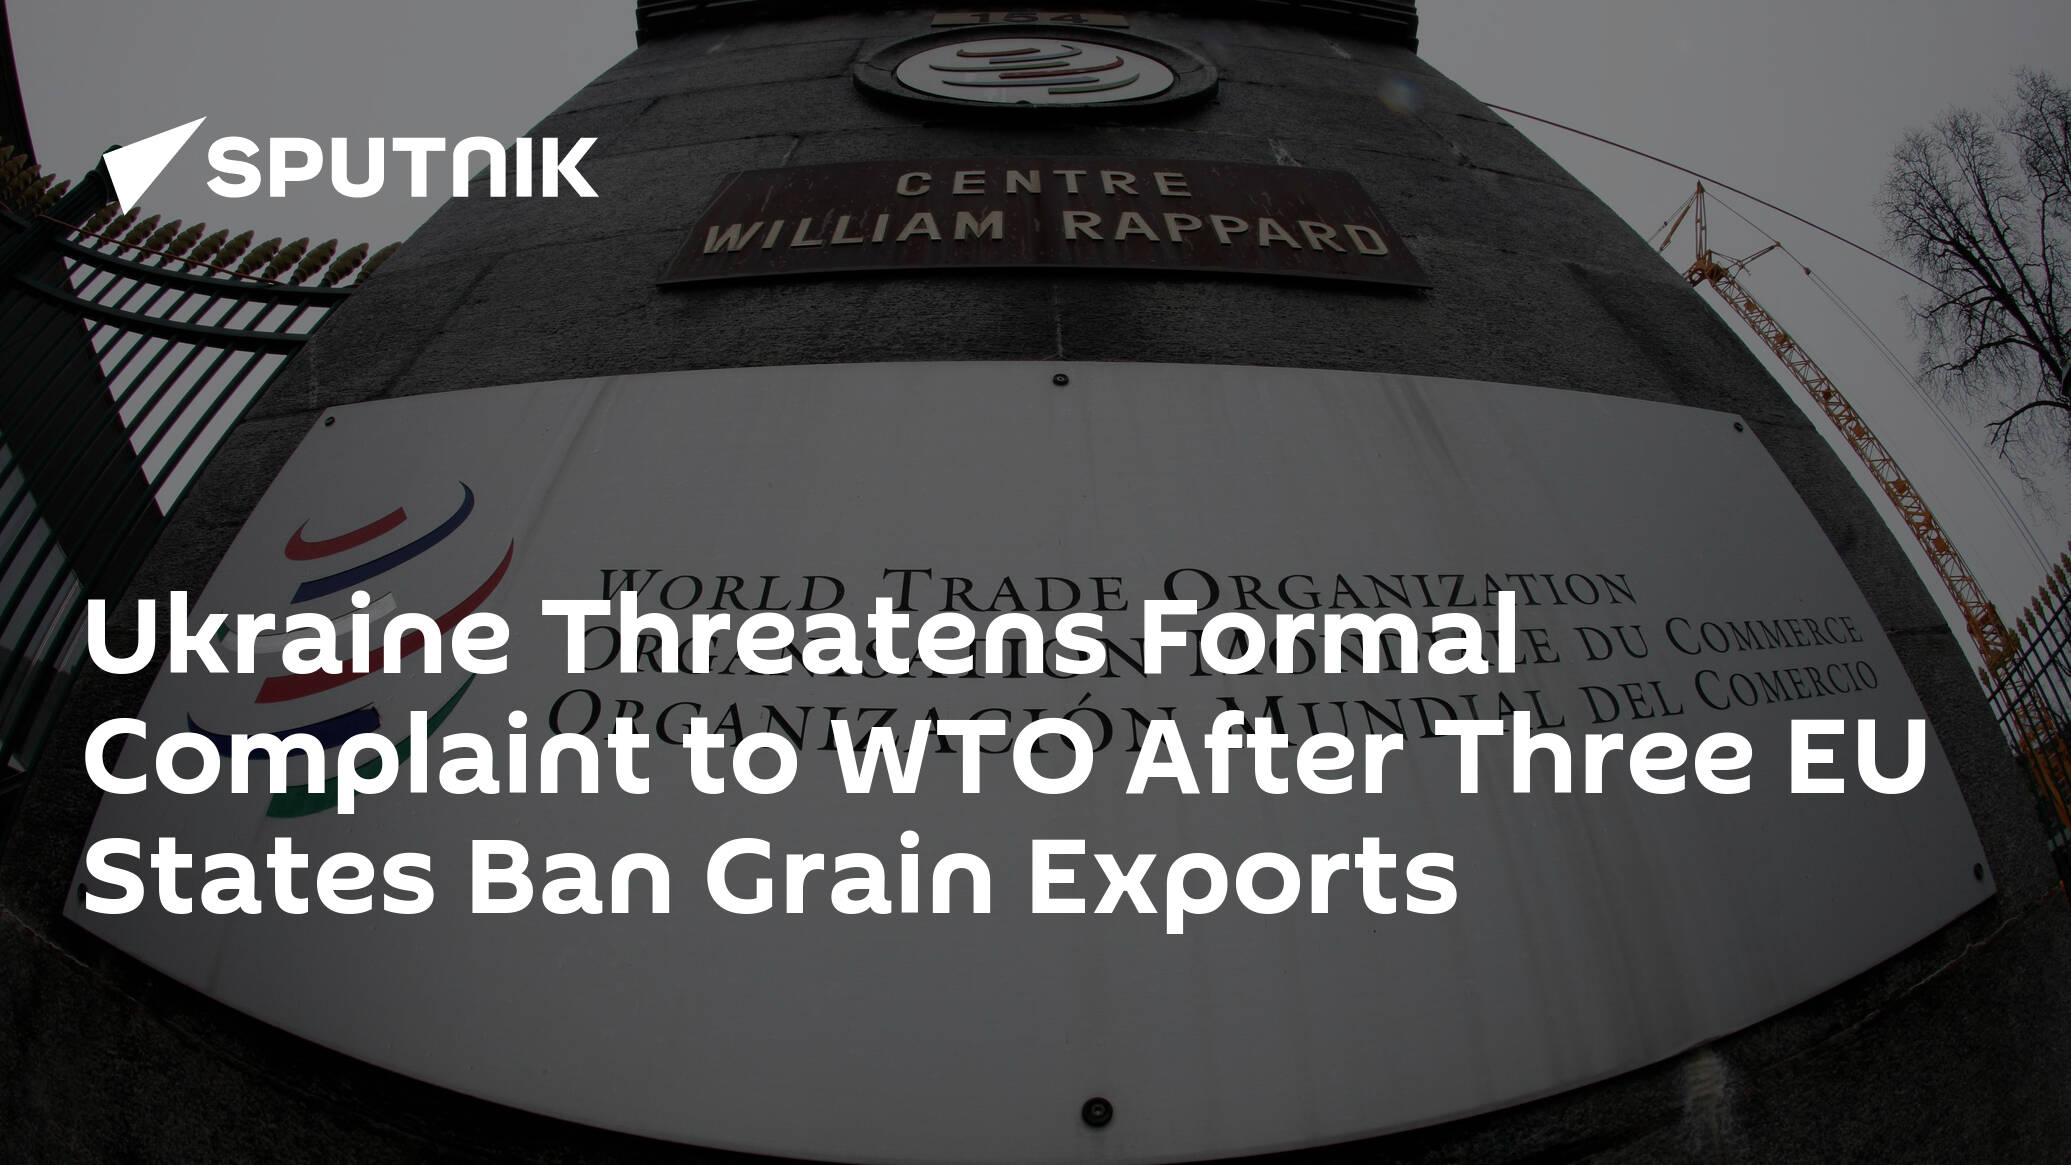 Ukraine Threatens to Complain to WTO After Three EU States Ban Its Grain Import